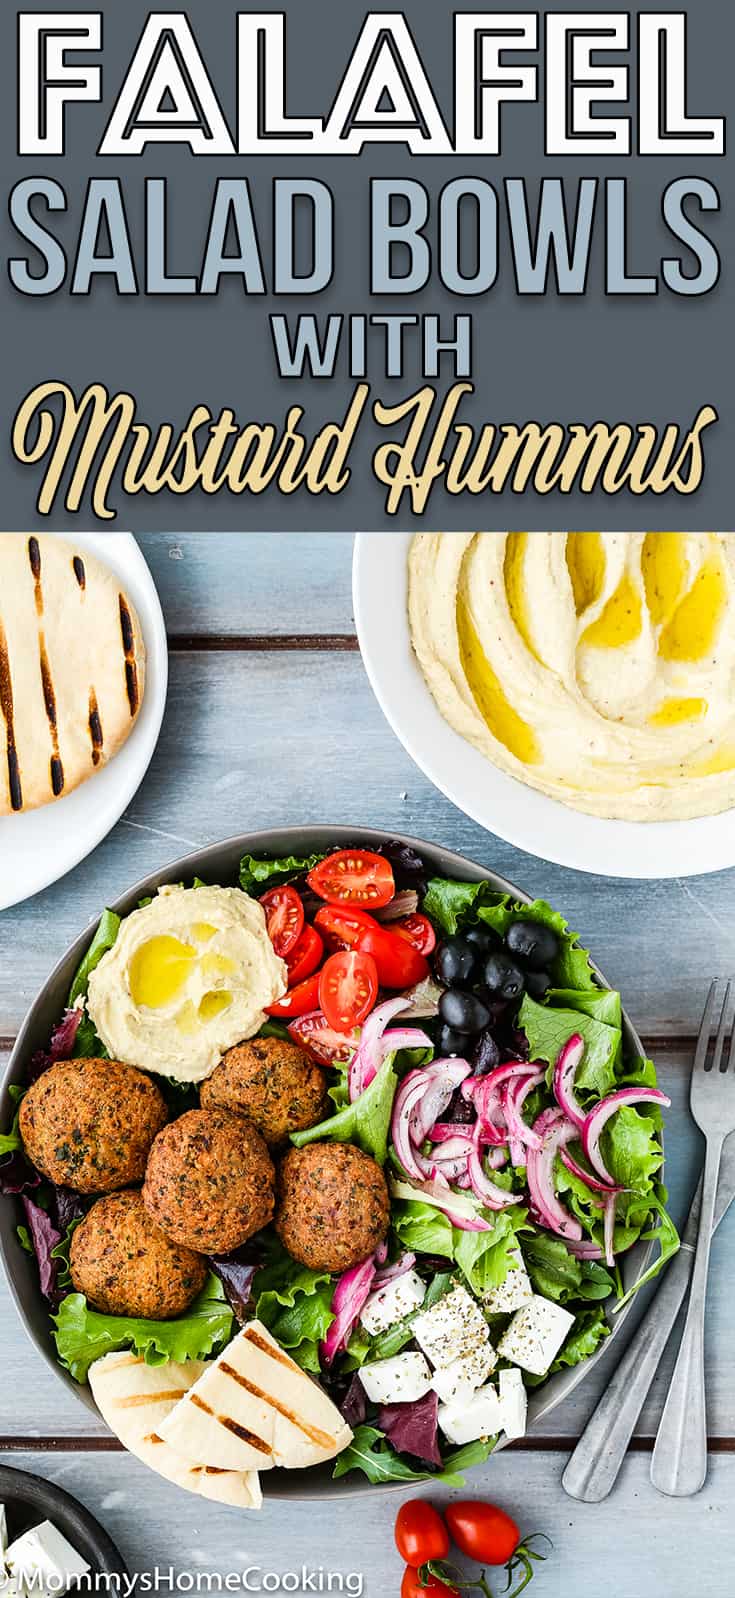 This Falafel Salad Bowls with Mustard Hummus is a burst of Mediterranean flavors in every bite! It’s not only easy to make, but delicious and satisfying too. A perfect meatless meal to share with family and friends during lent time! https://mommyshomecooking.com